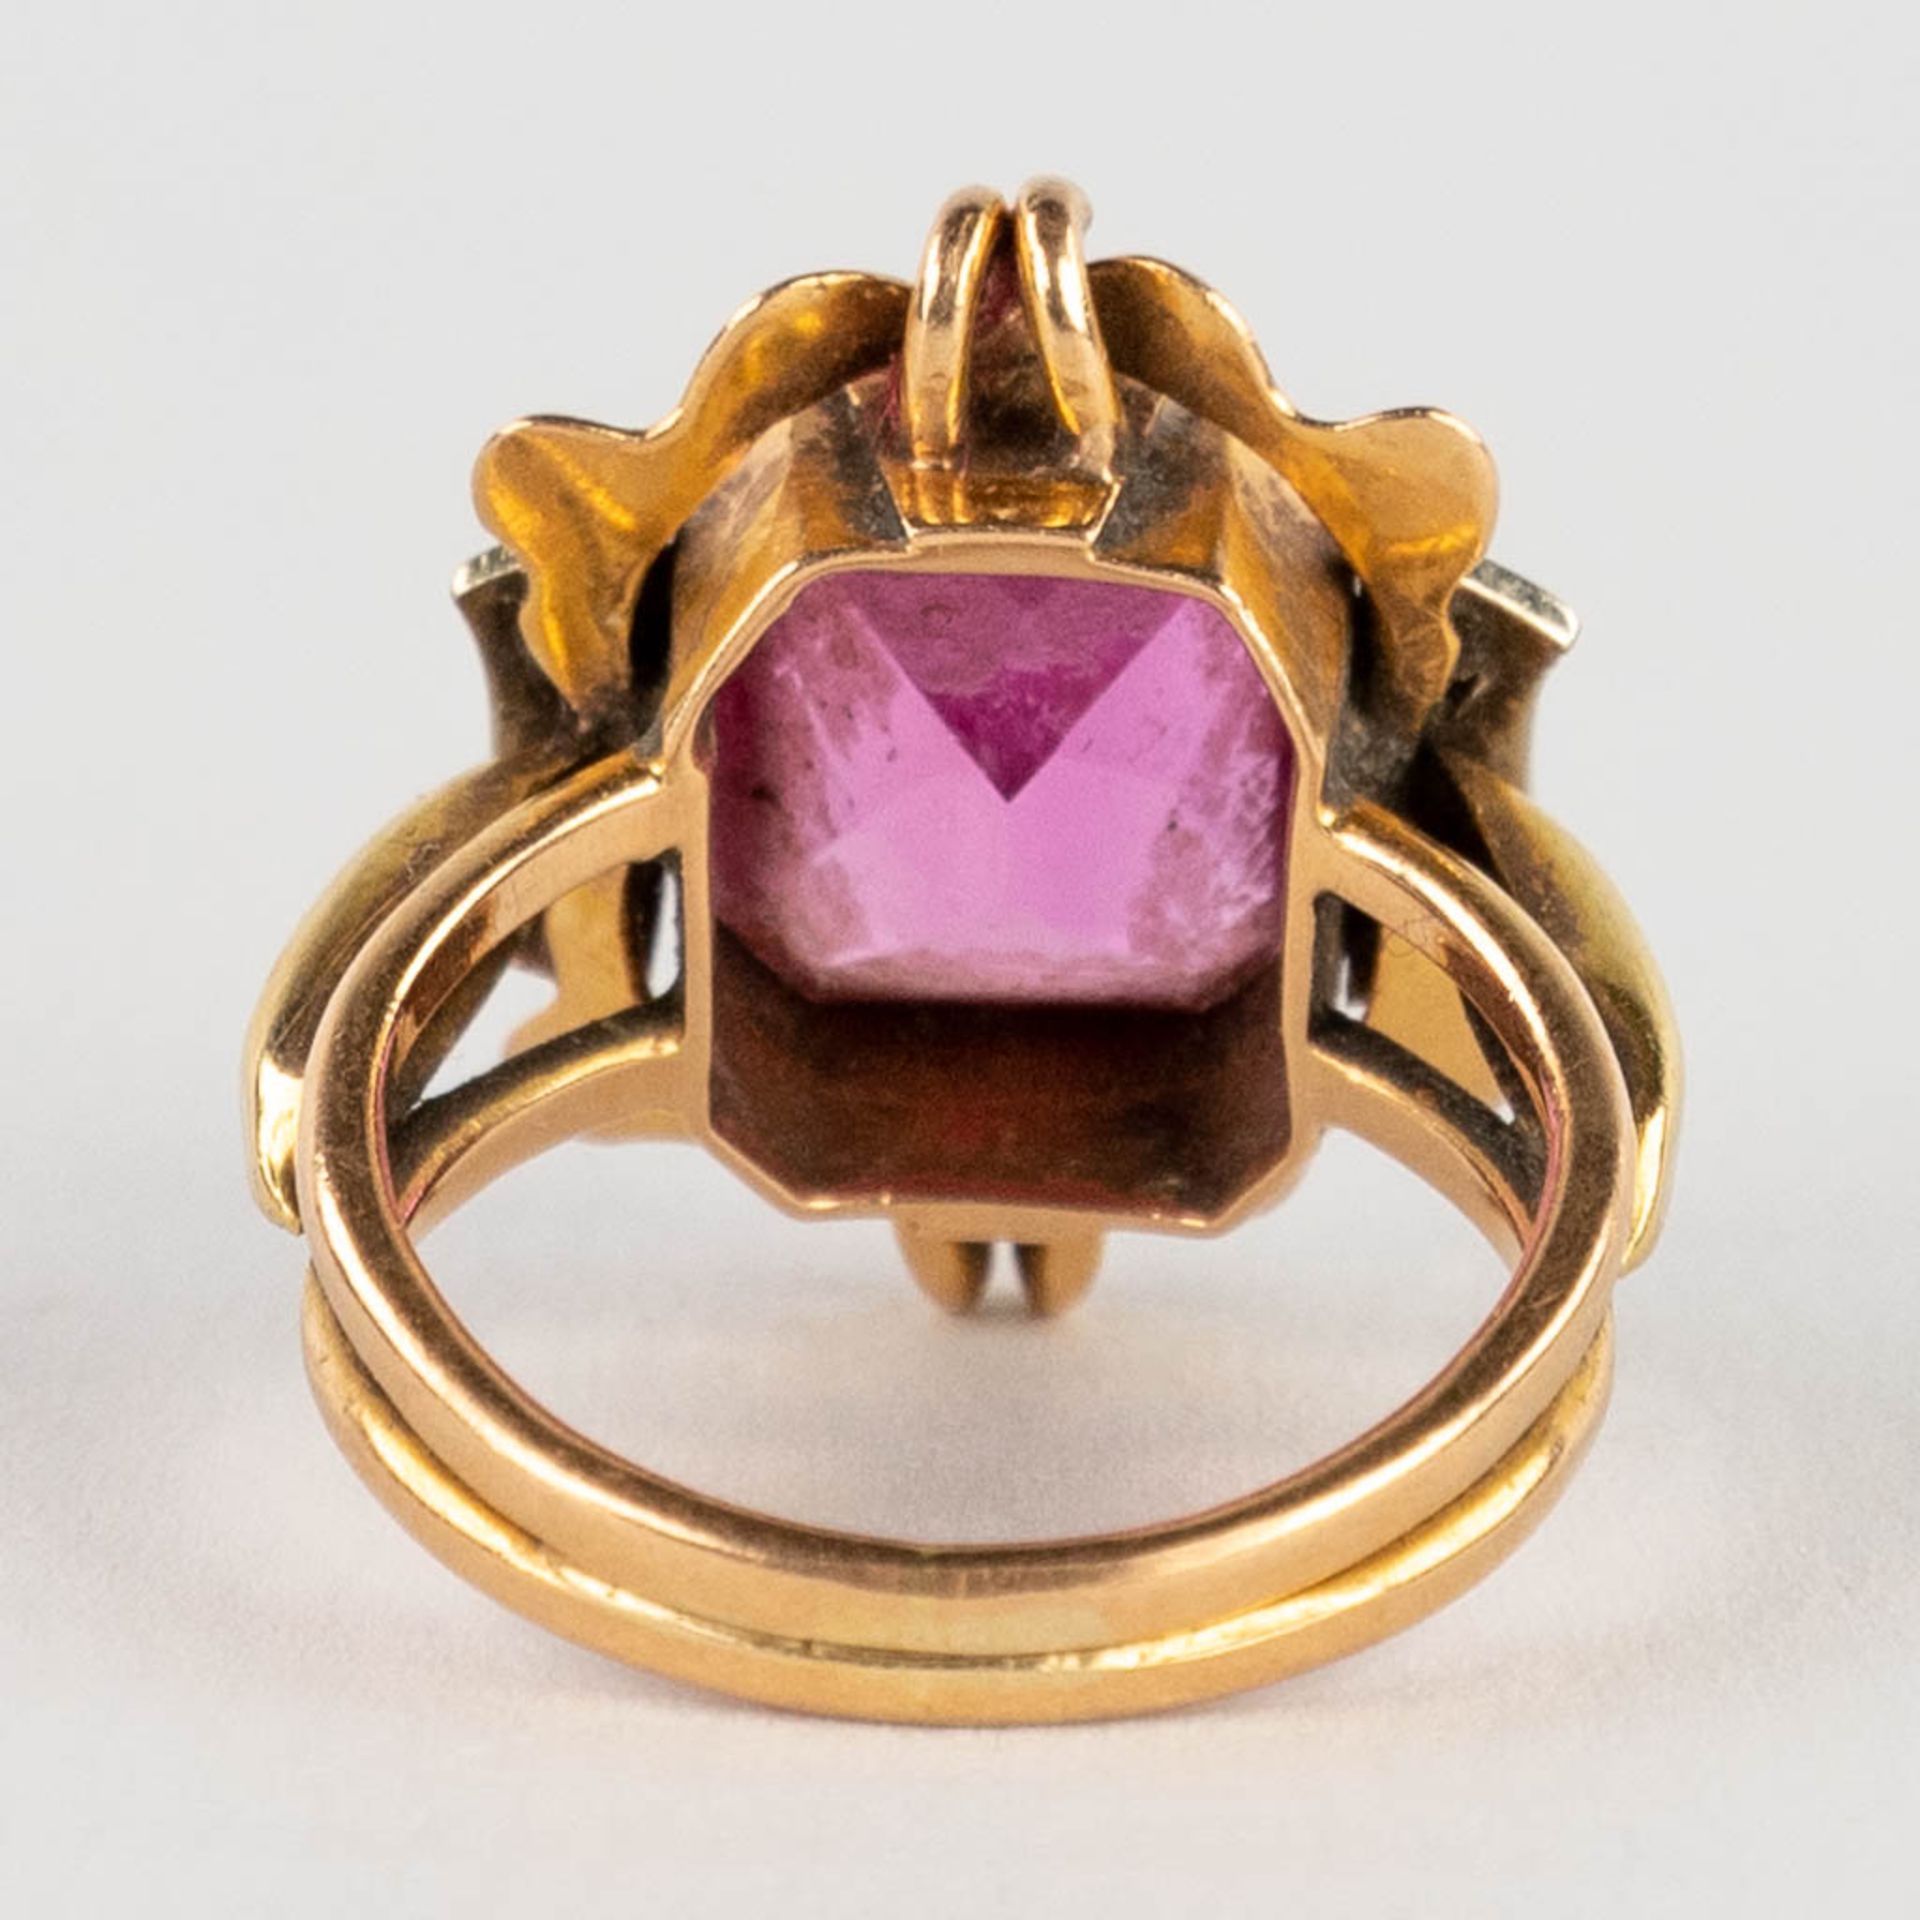 A yellow gold ring with a cut light purple stone/glass. 6,87g. Ring size: 52. - Image 6 of 9